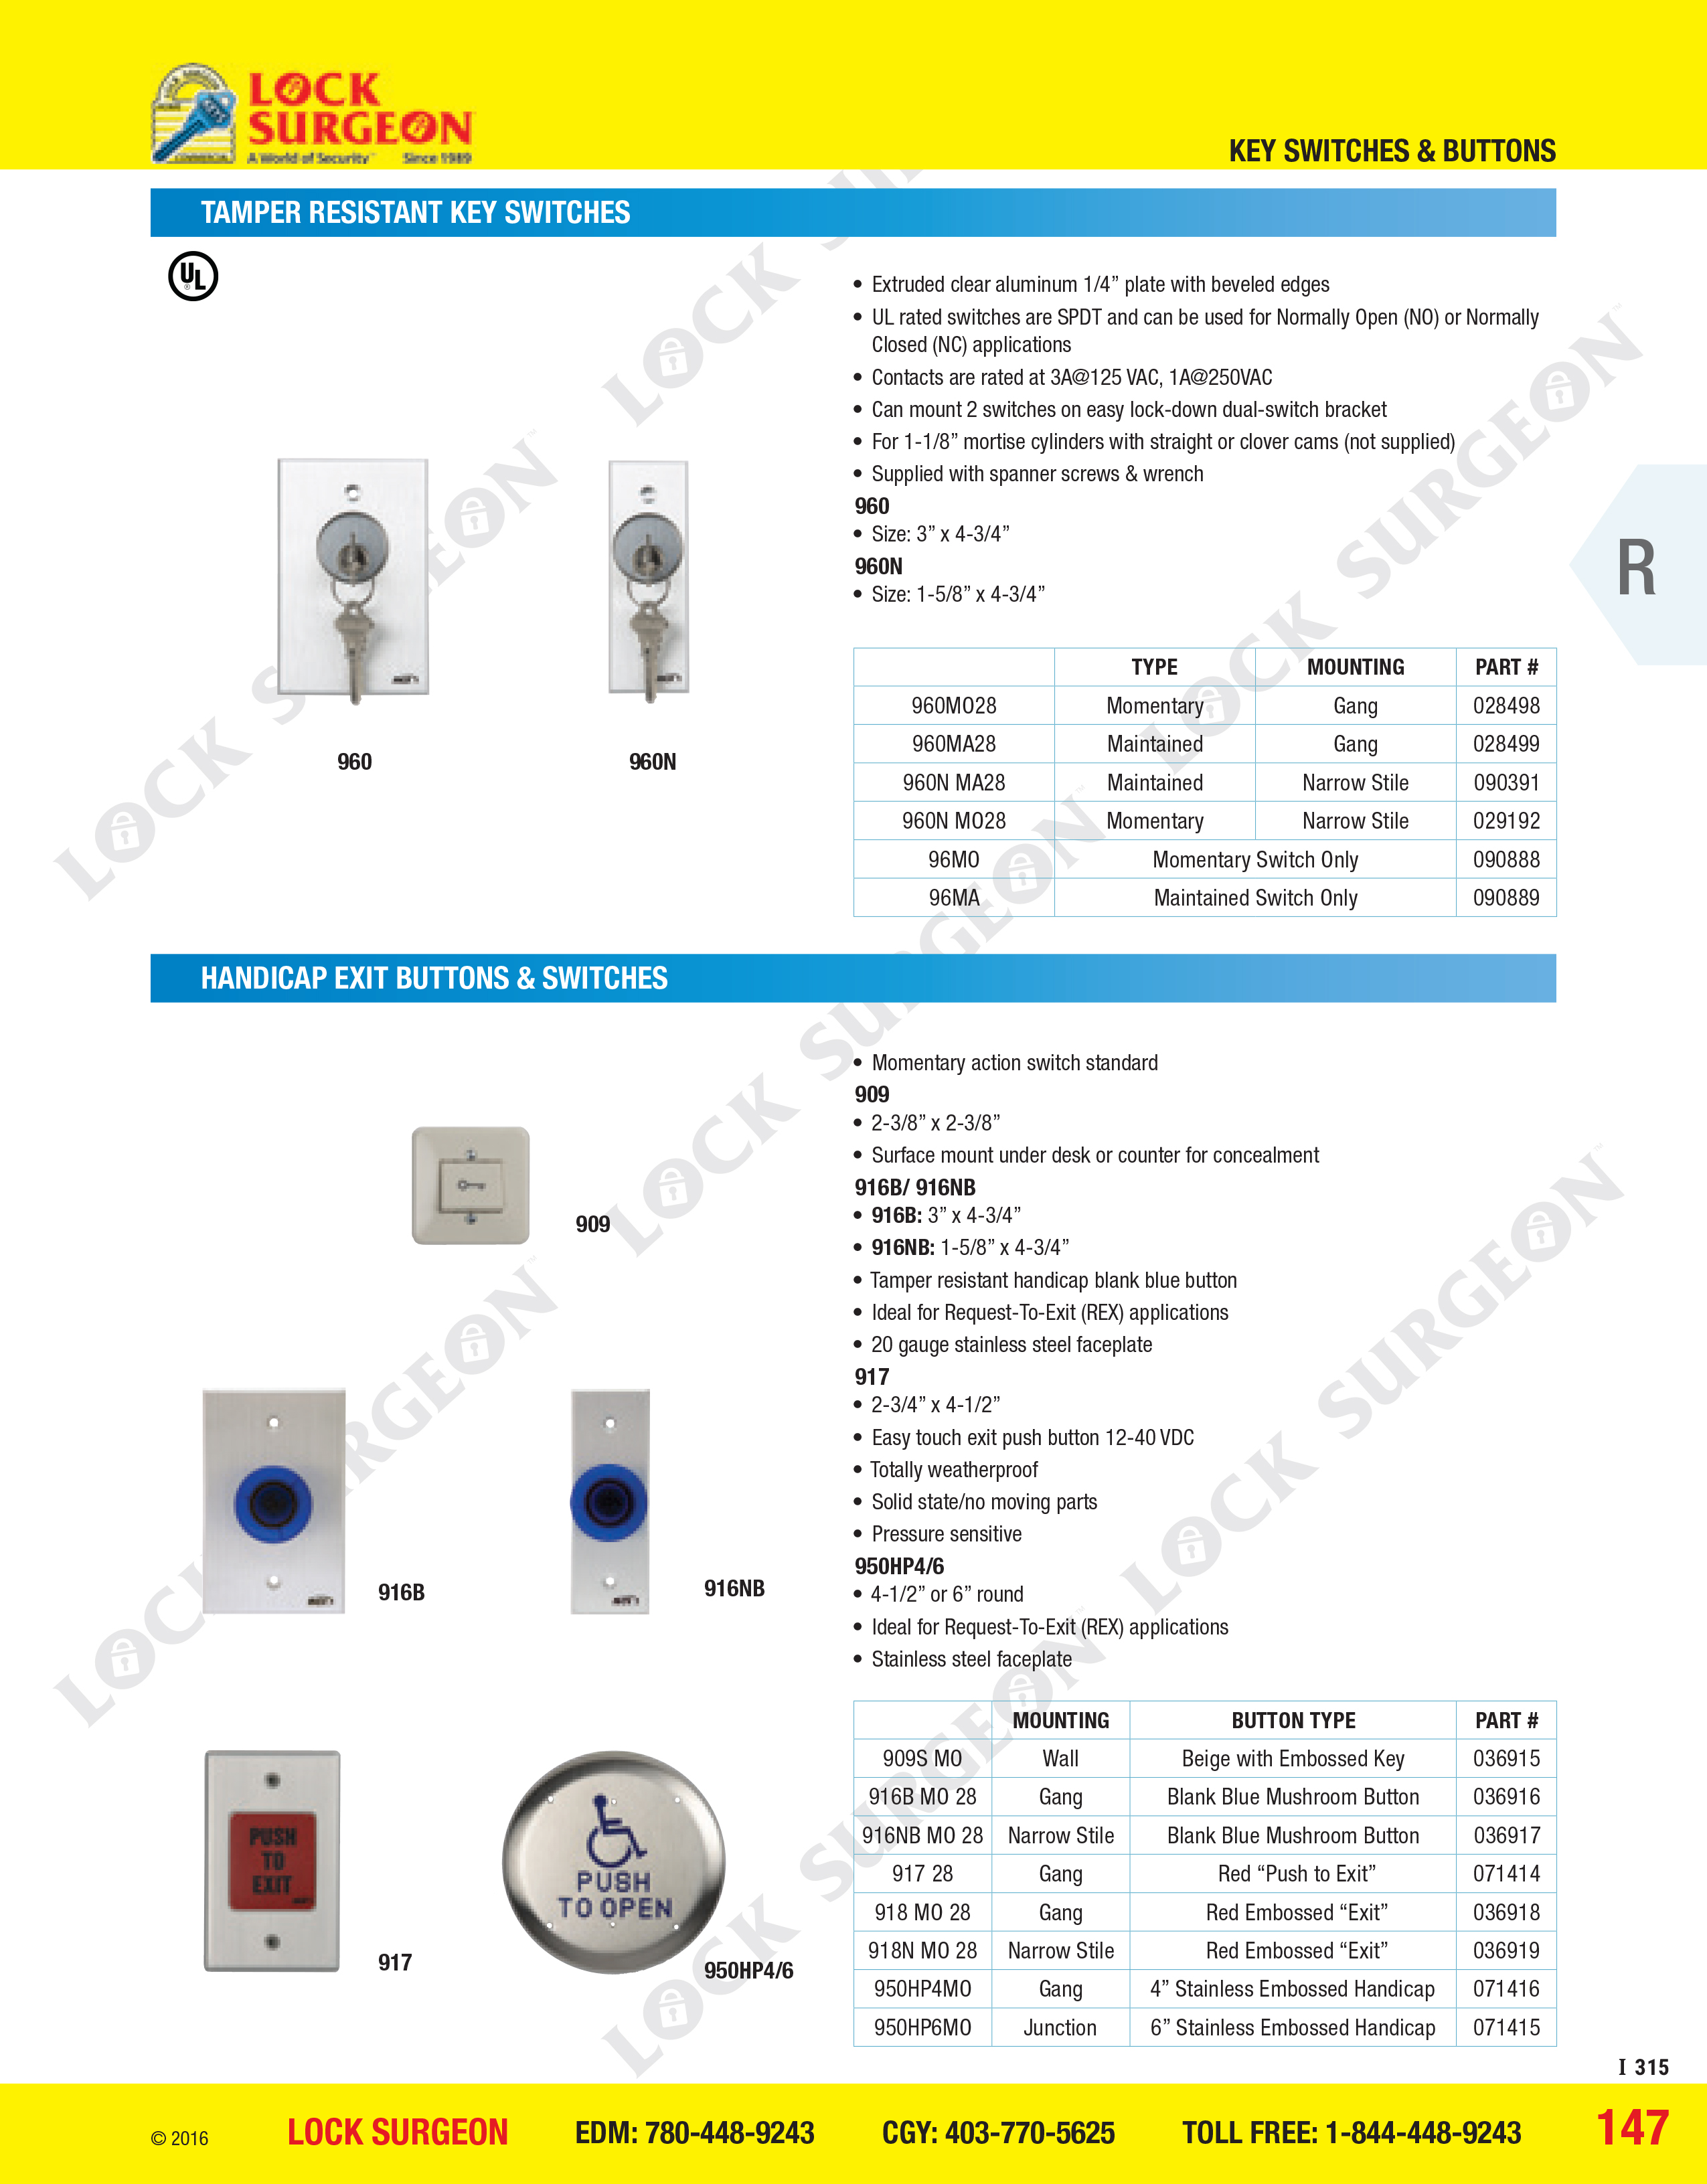 Acheson Tamper Resistant key switches, handicap exit buttons and switches